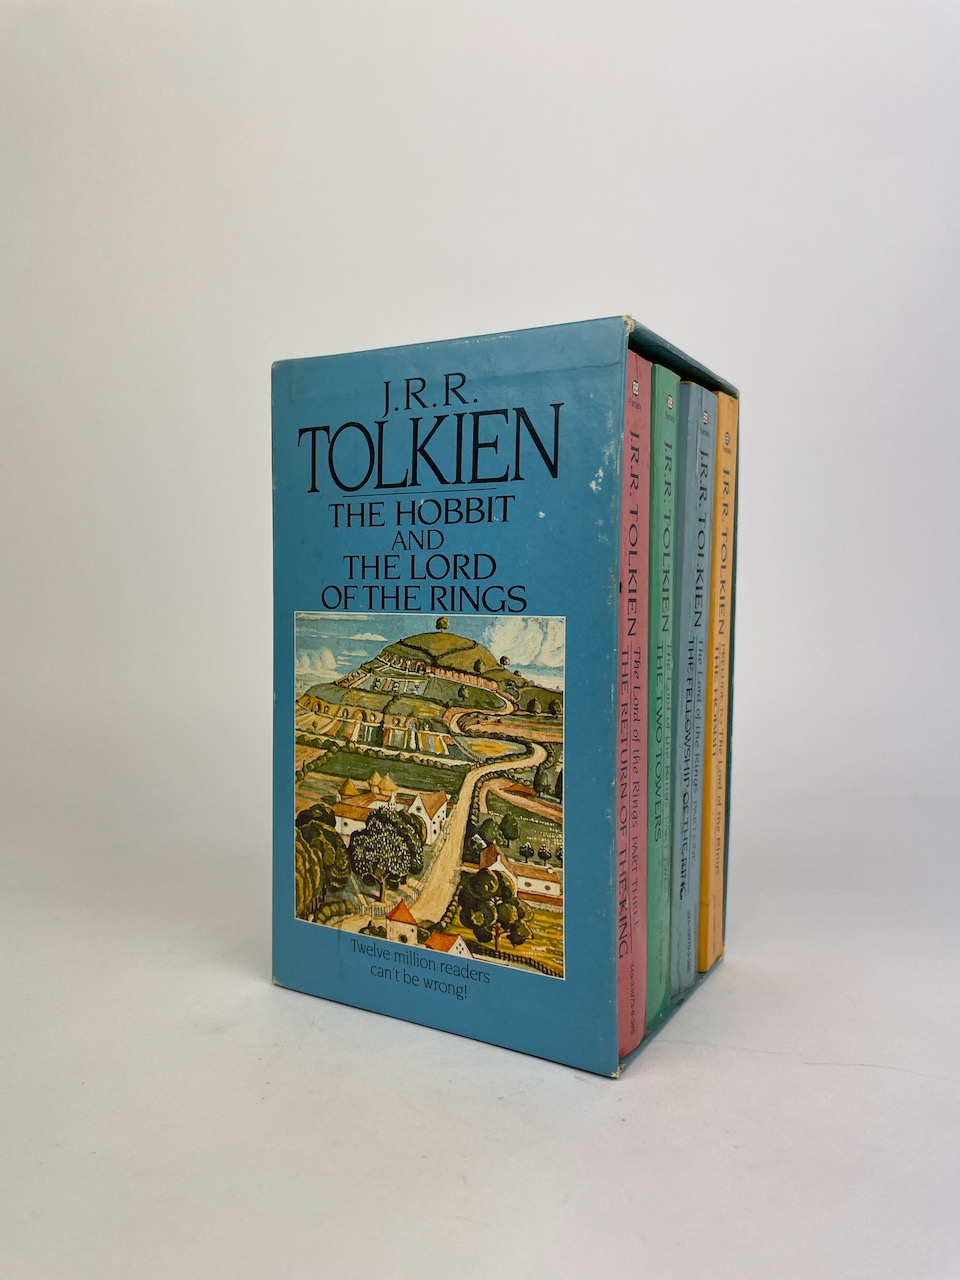 The Hobbit and The Lord of the Rings, Four Paperback Book Boxset from 1986, Blue Slipcase art by J.R.R. Tolkien 1